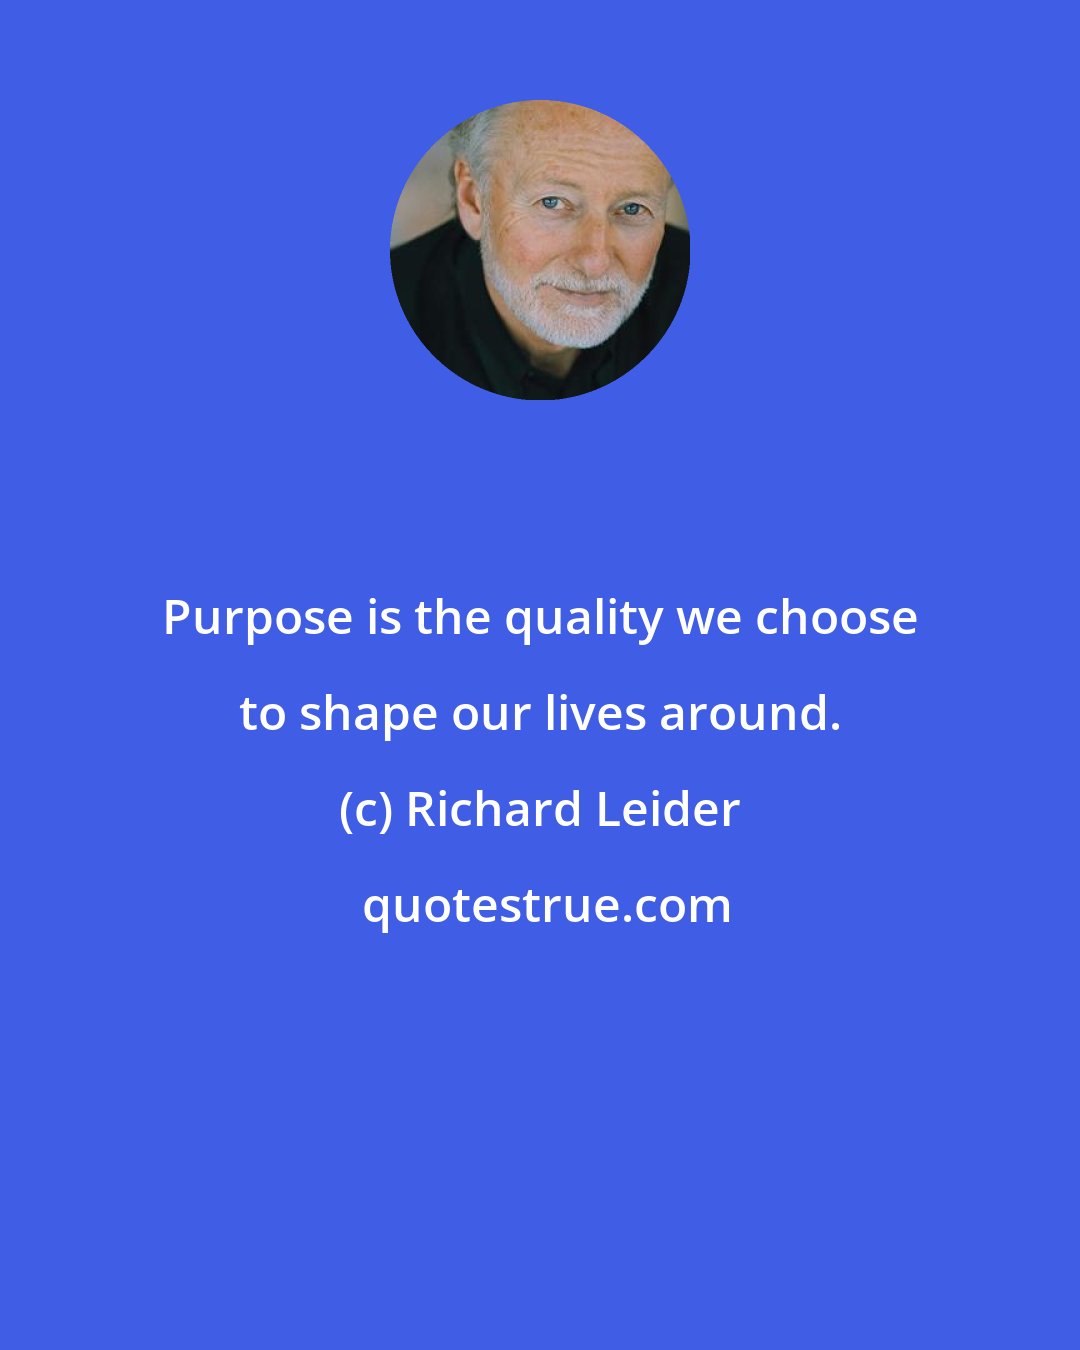 Richard Leider: Purpose is the quality we choose to shape our lives around.